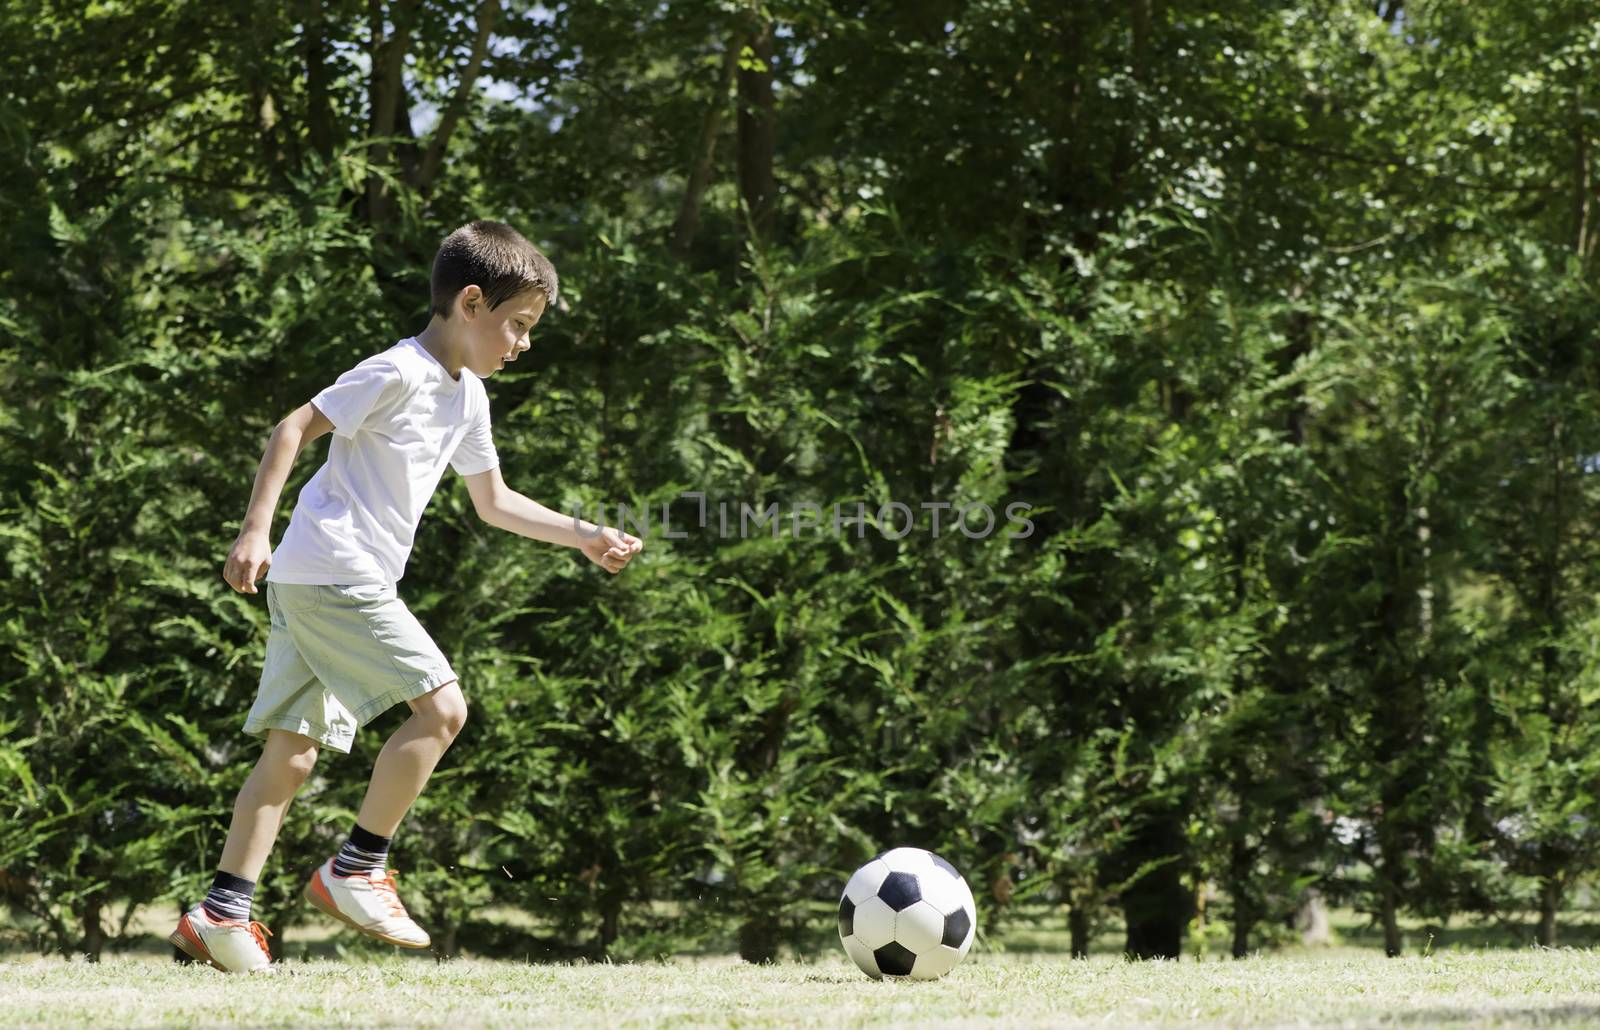 Child playing football in a stadium. Trees on the background